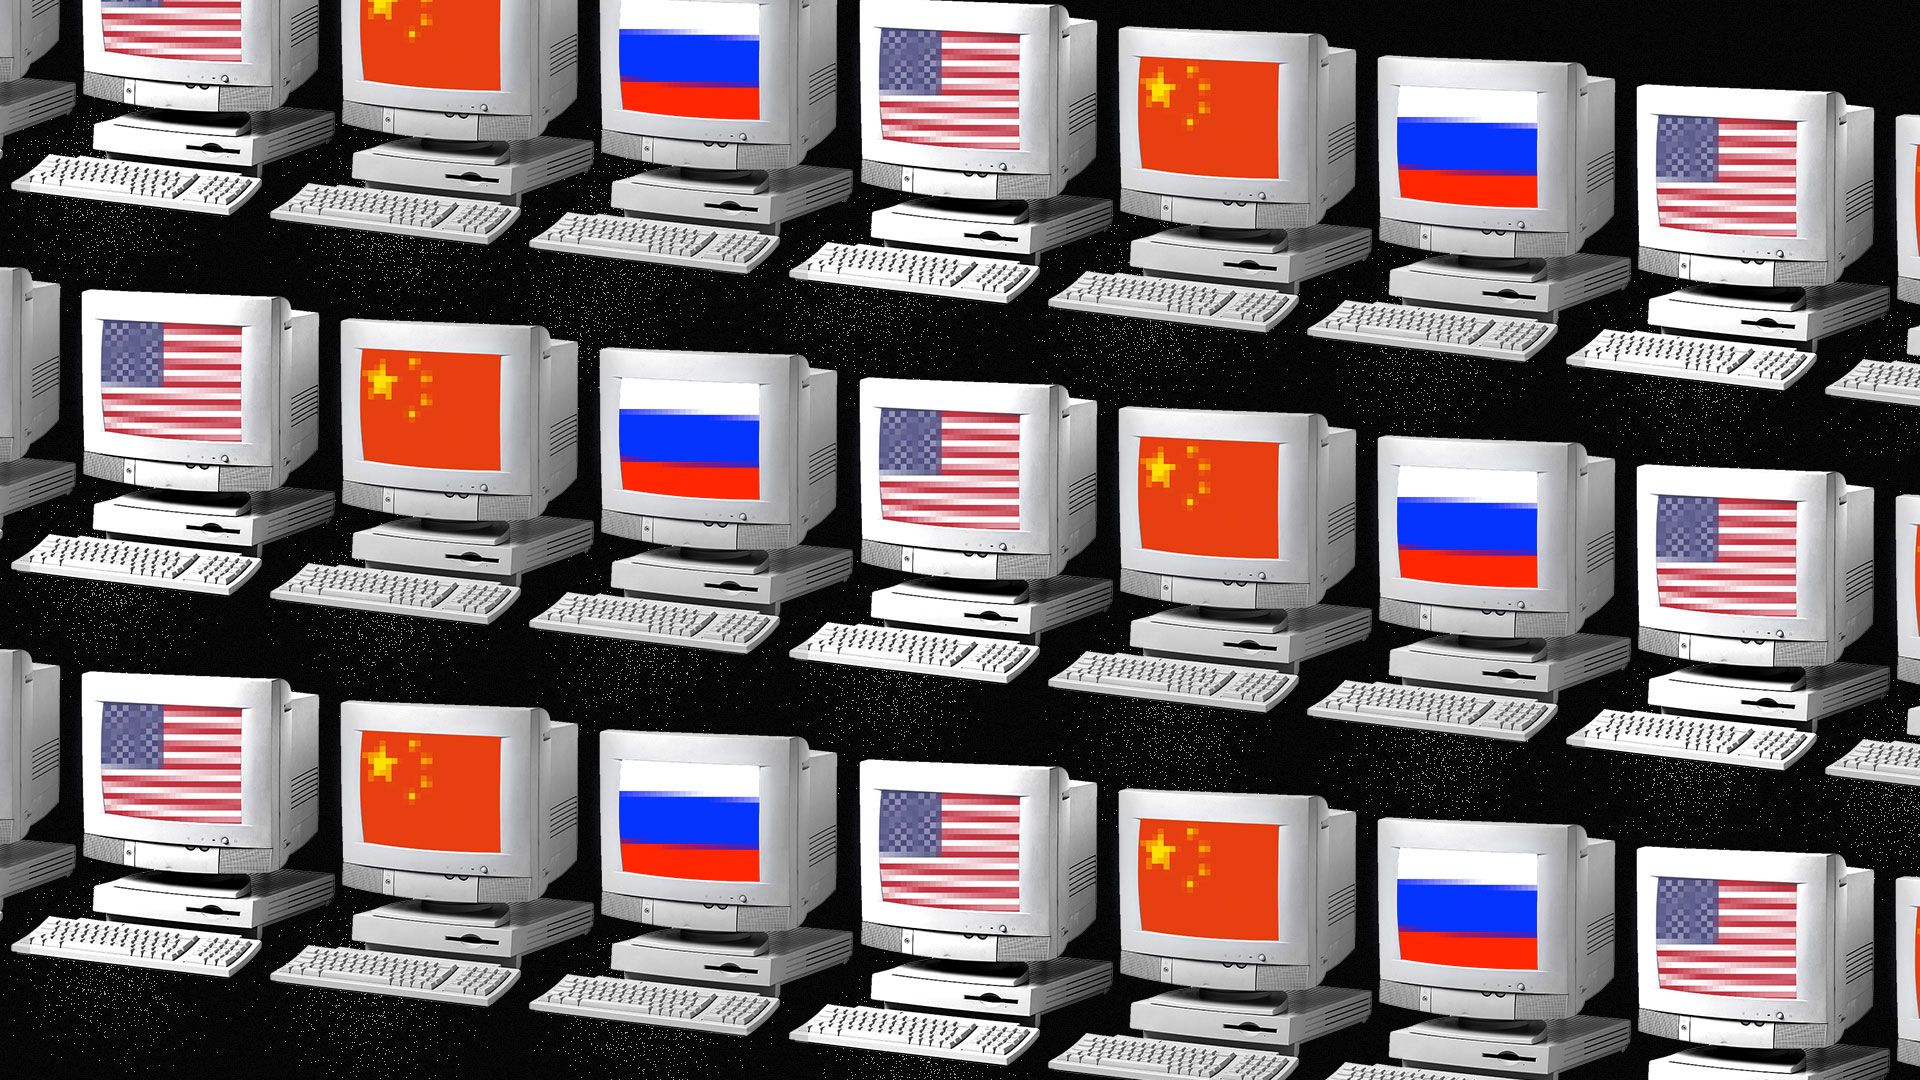 Computer screens with the Russian, Chinese and American flags on the monitor